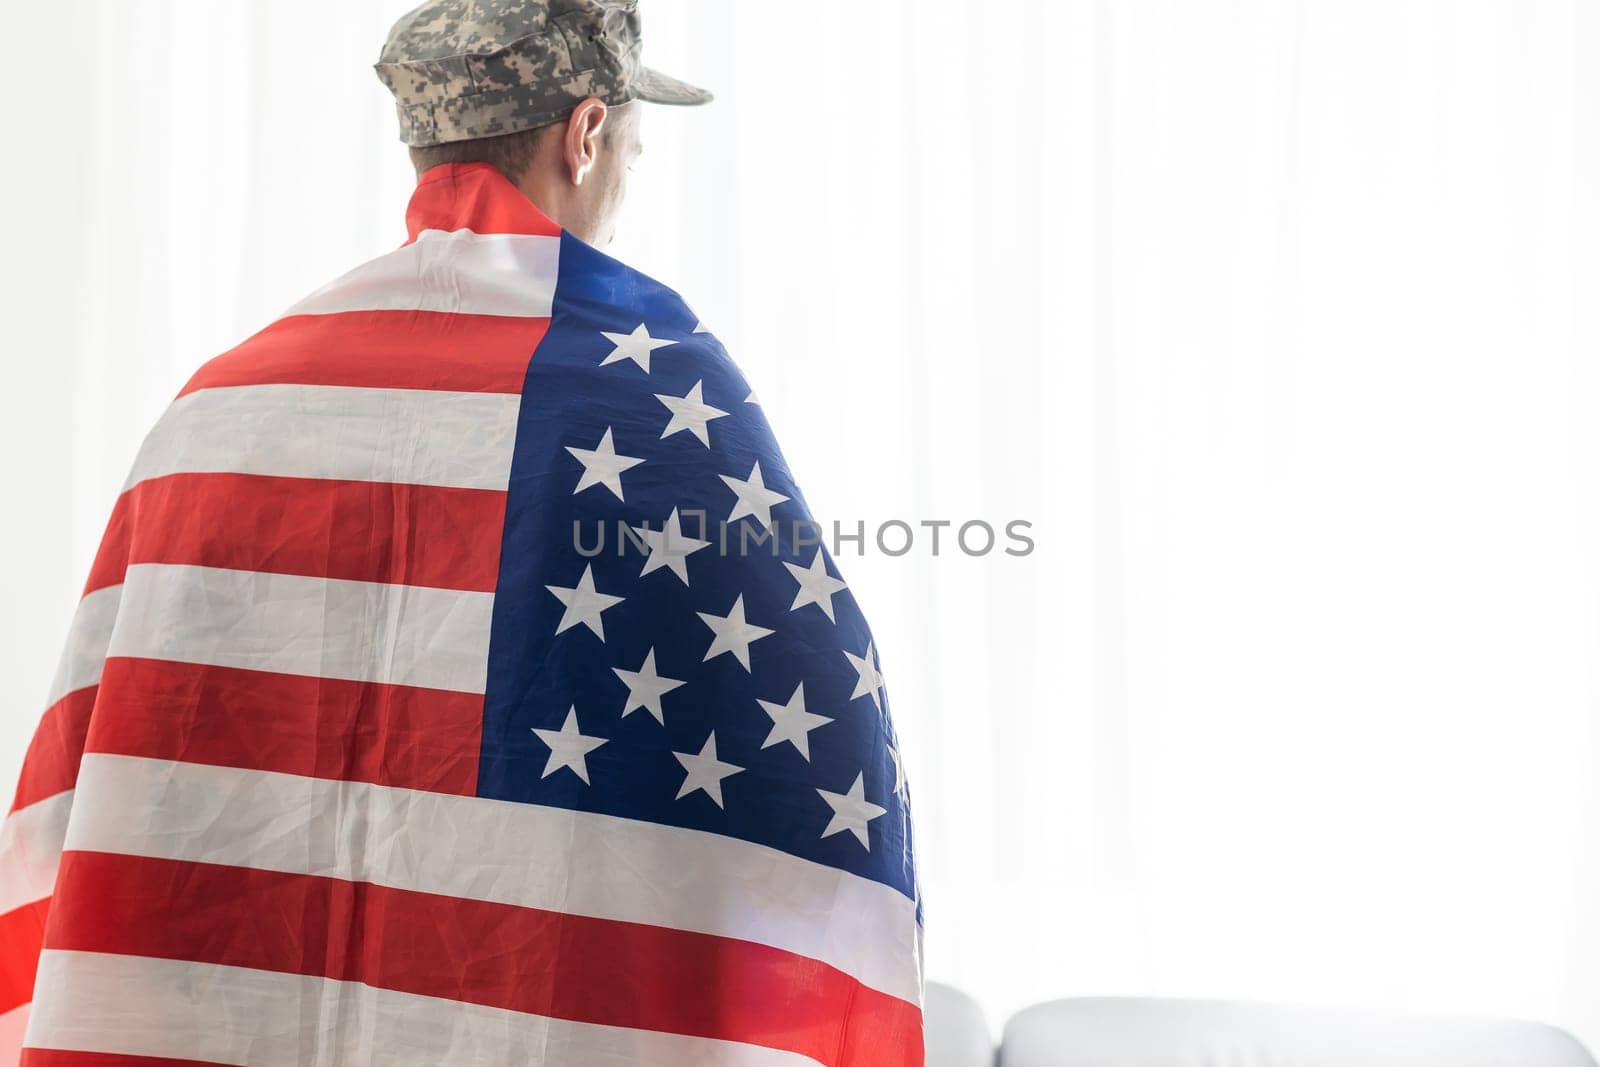 soldier in uniform and cap holding american flag.